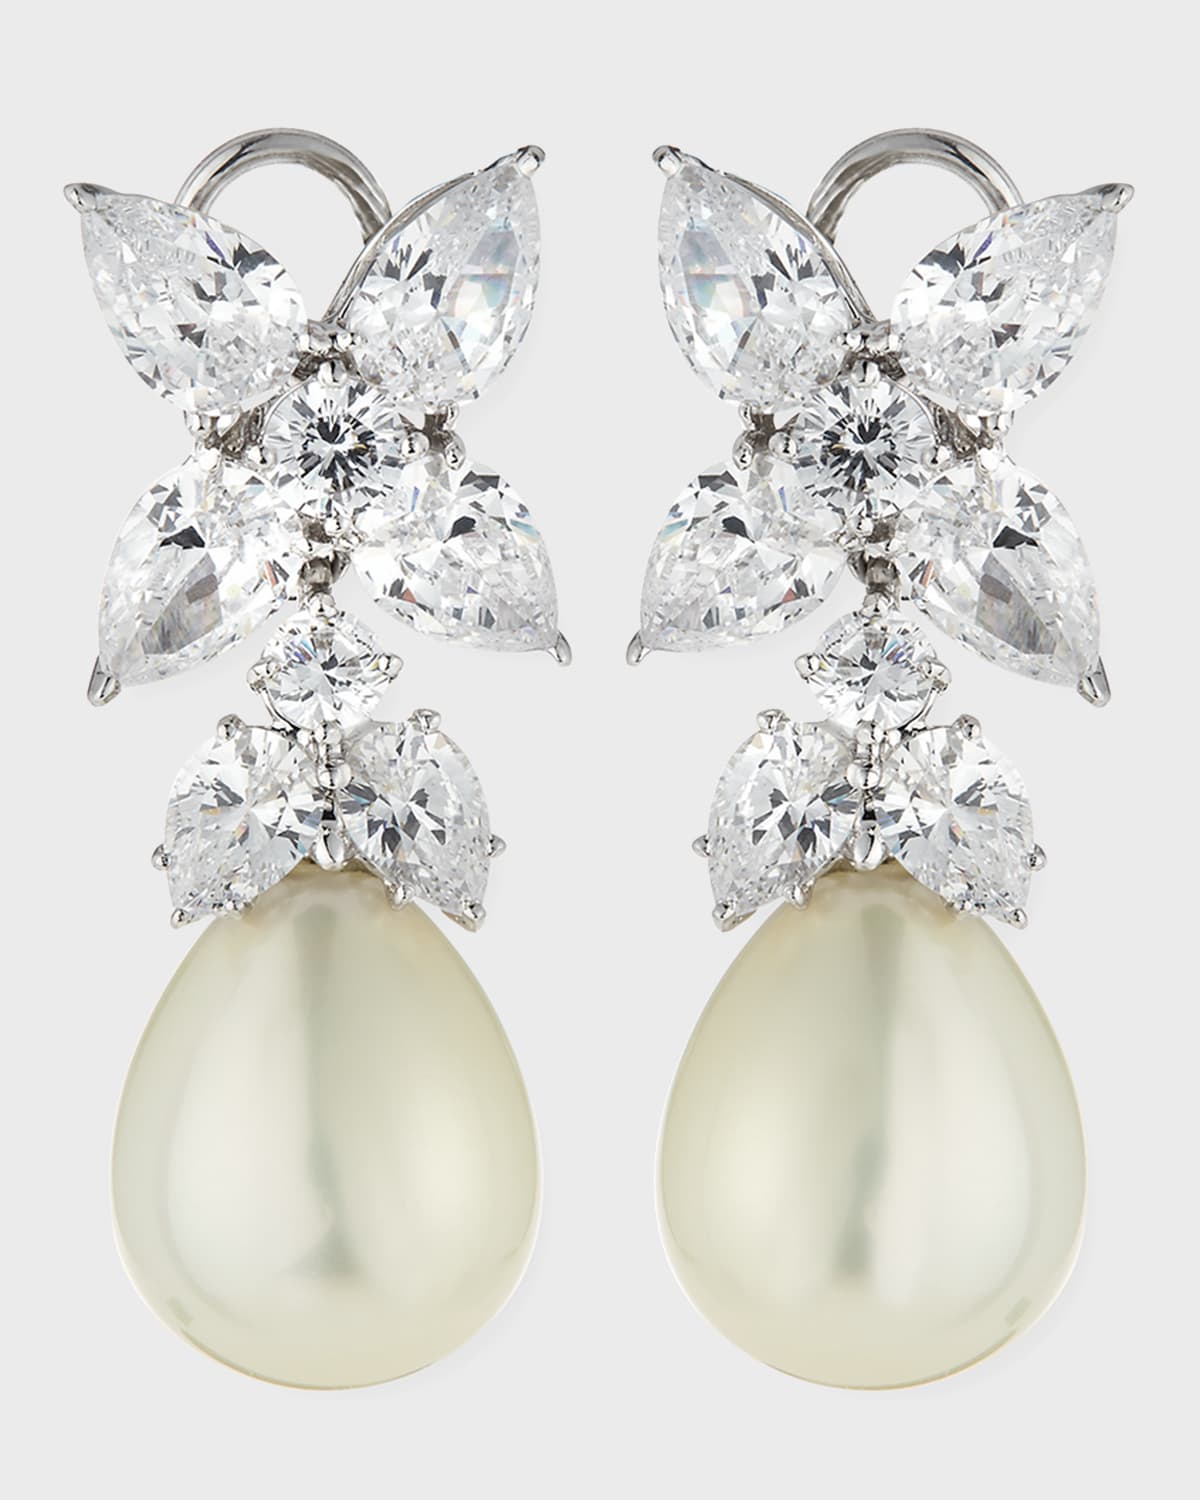 Fantasia by DeSerio 10.0 TCW Flower Top CZ & Simulated Pearl Drop Earrings